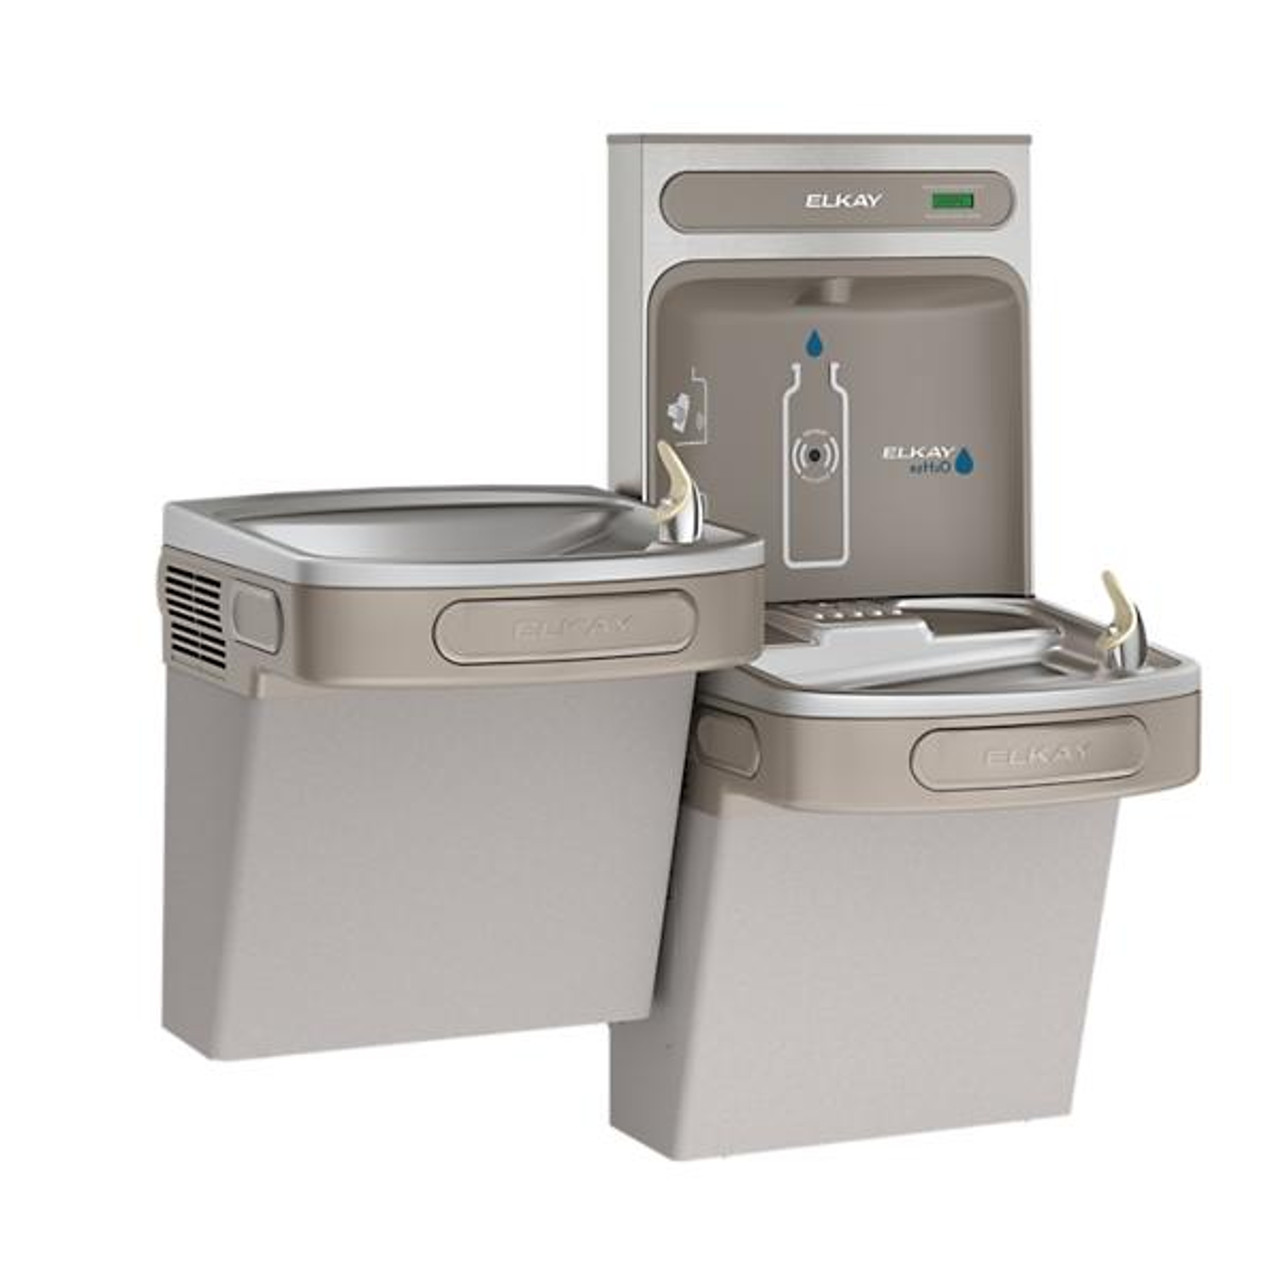 Elkay Wall Mount Bi-Level Drinking Fountain with Bottle Filler - Non-Filtered - Chicken Pieces